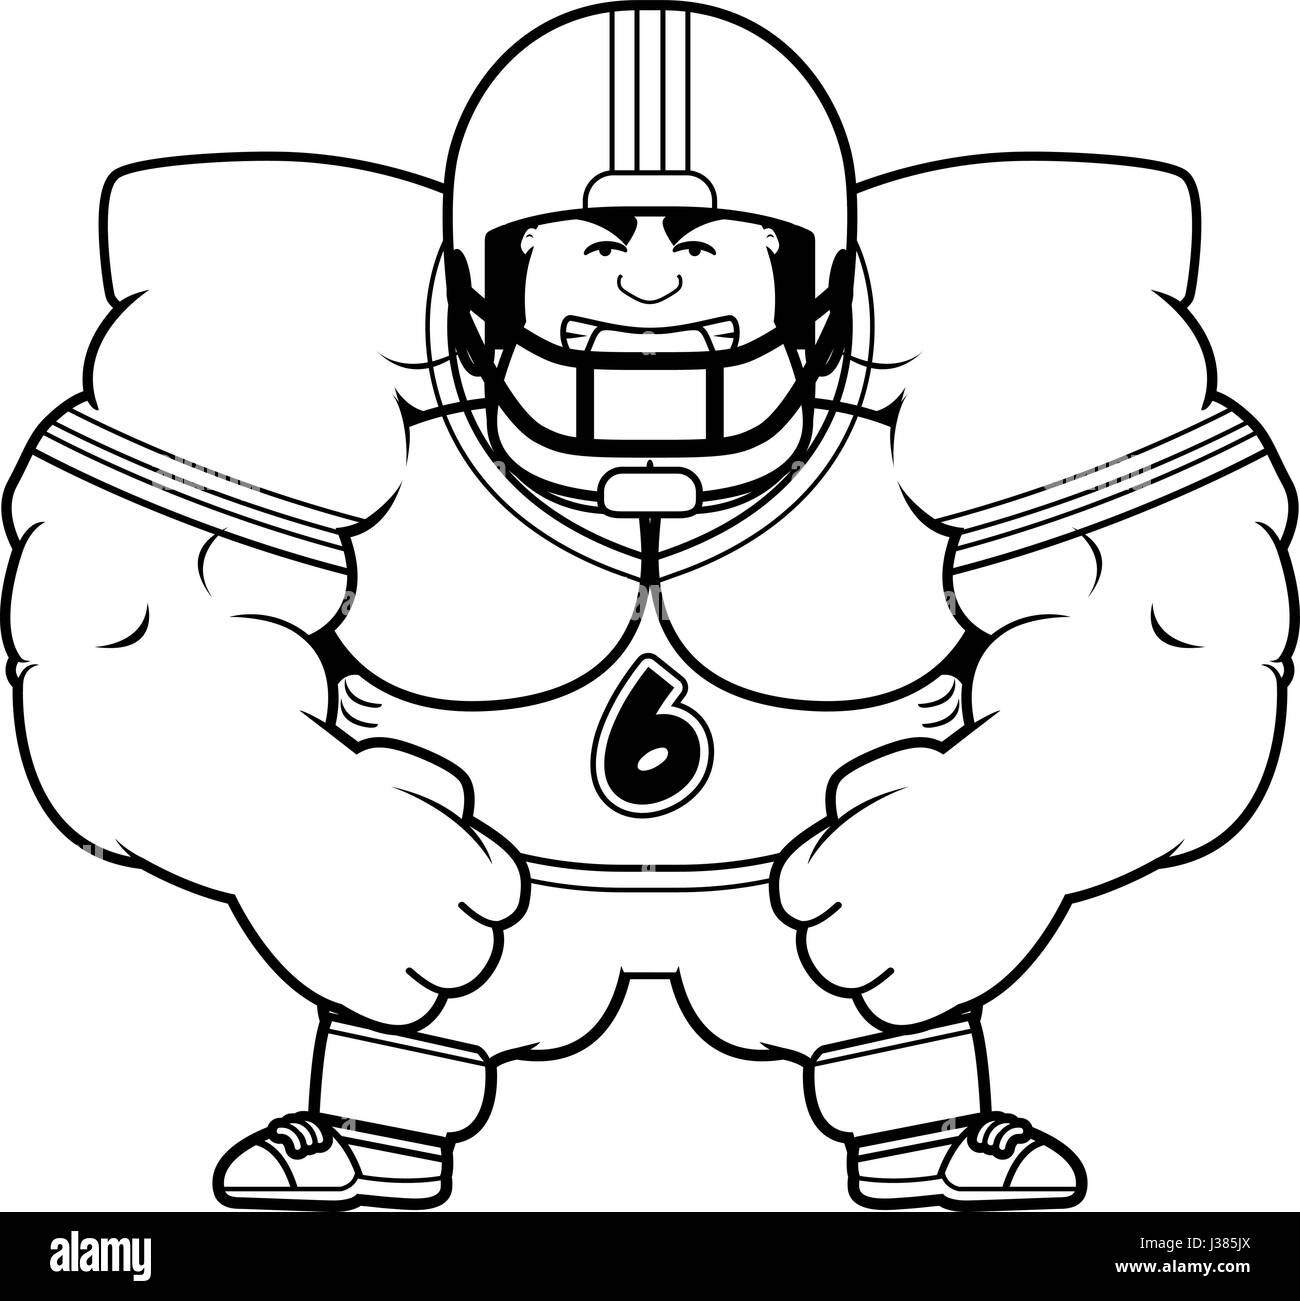 Football player cartoon Black and White Stock Photos & Images - Alamy